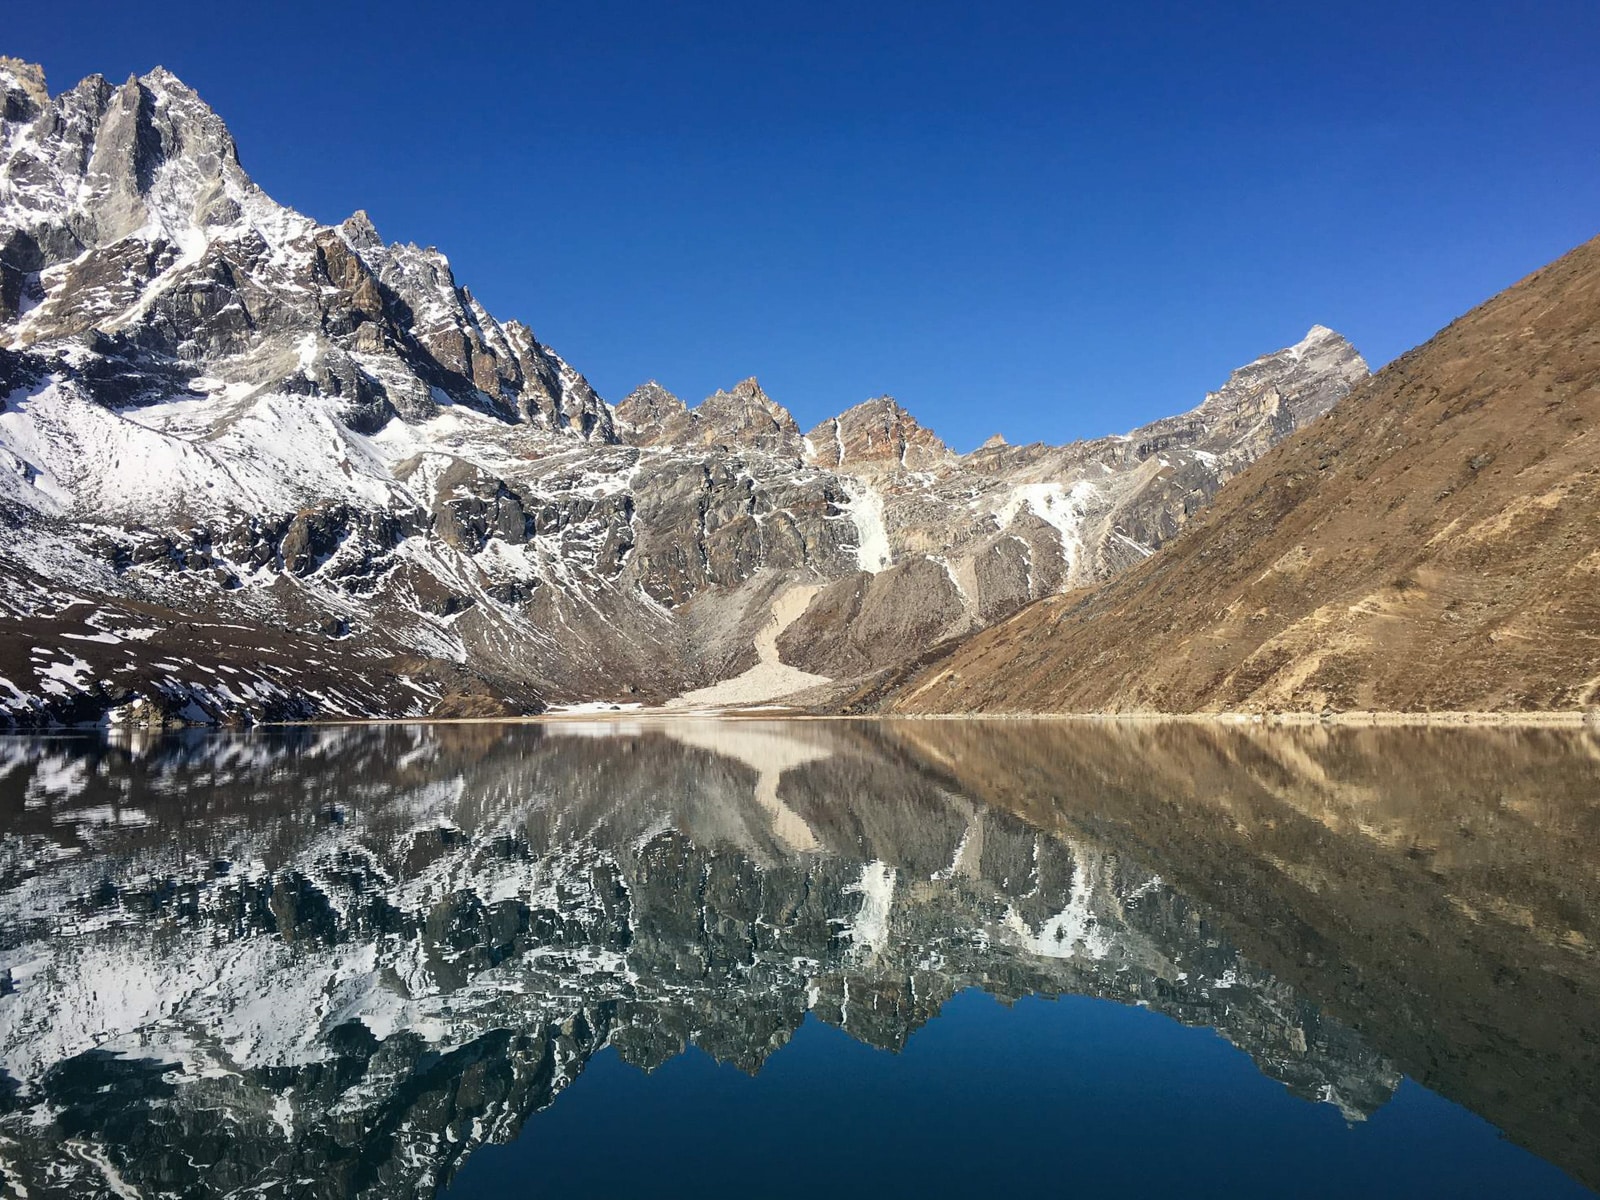 Mountains reflected in Gokyo Lake along the EBC trail in Nepal